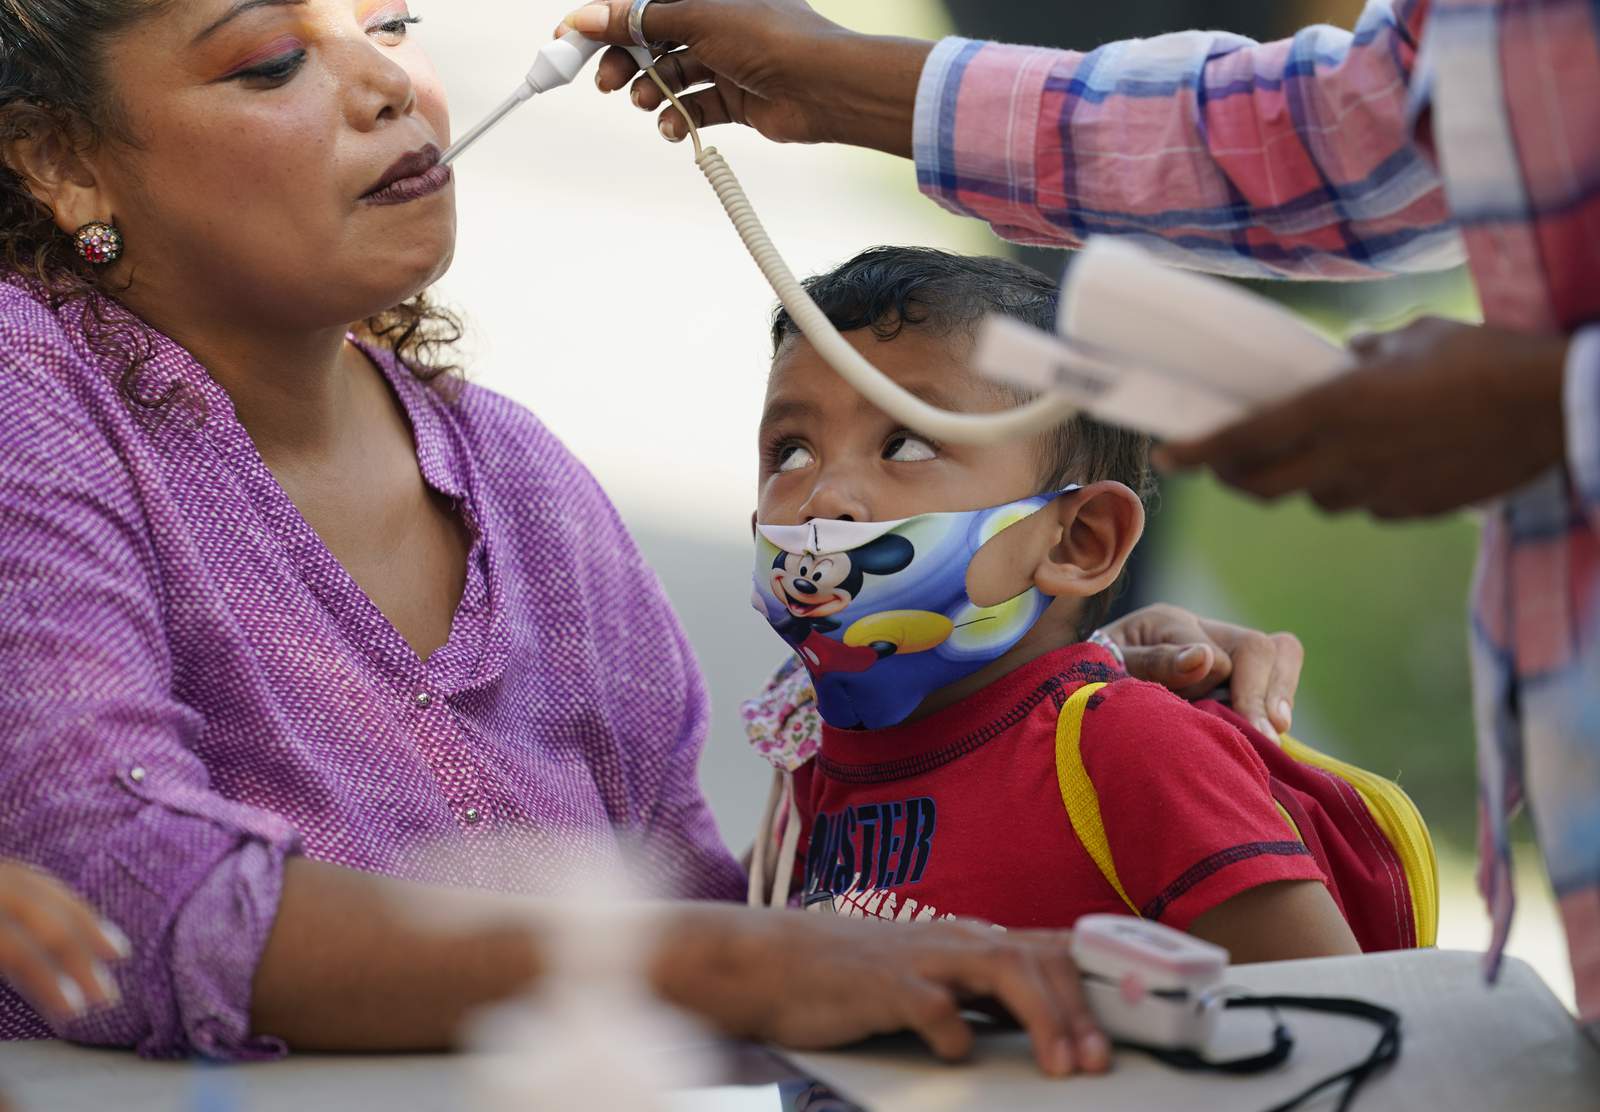 Aid groups aim to bring health care to migrants on way to US